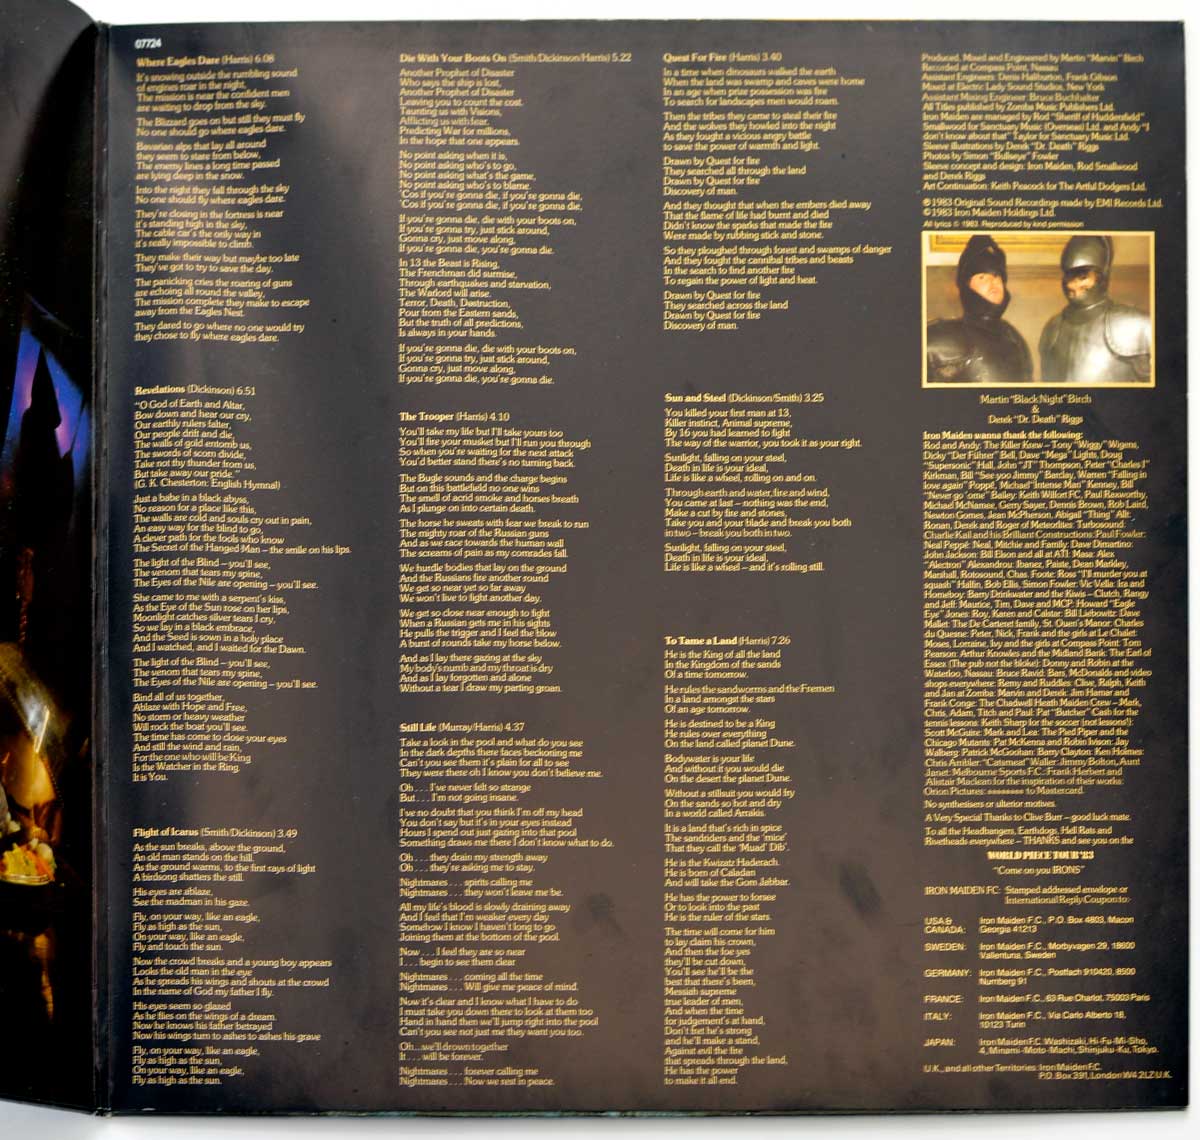 Photo of album back cover IRON MAIDEN - Piece Of Mind Europe Blue Rim-Text Gatefold Cover 